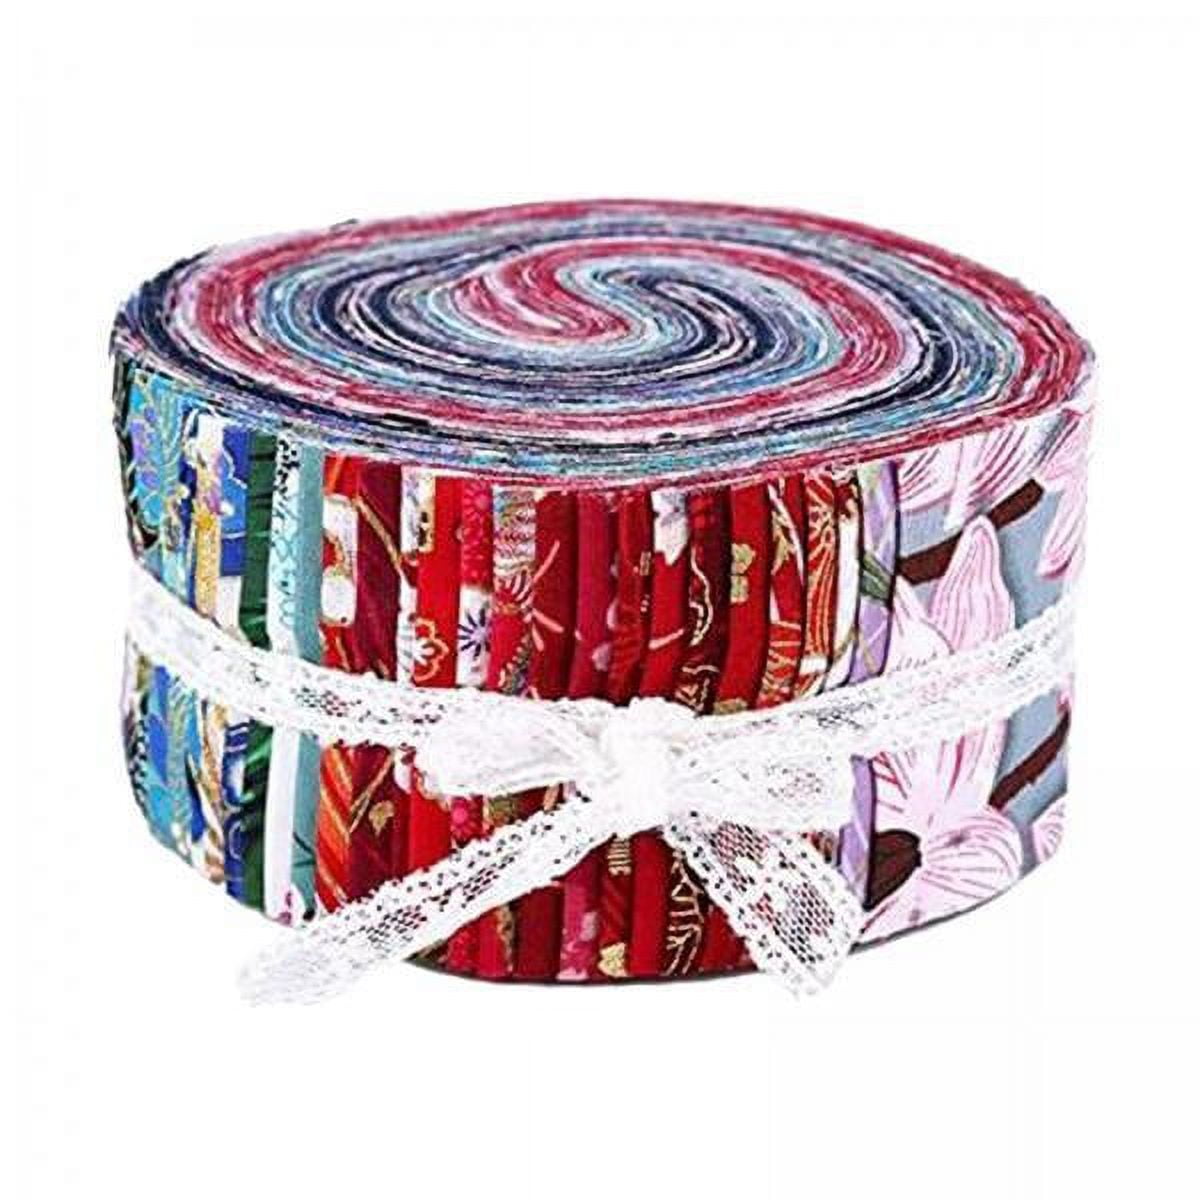 15 2.5 Quilting Fabric Jelly Roll Strips Retro Flower Power 3